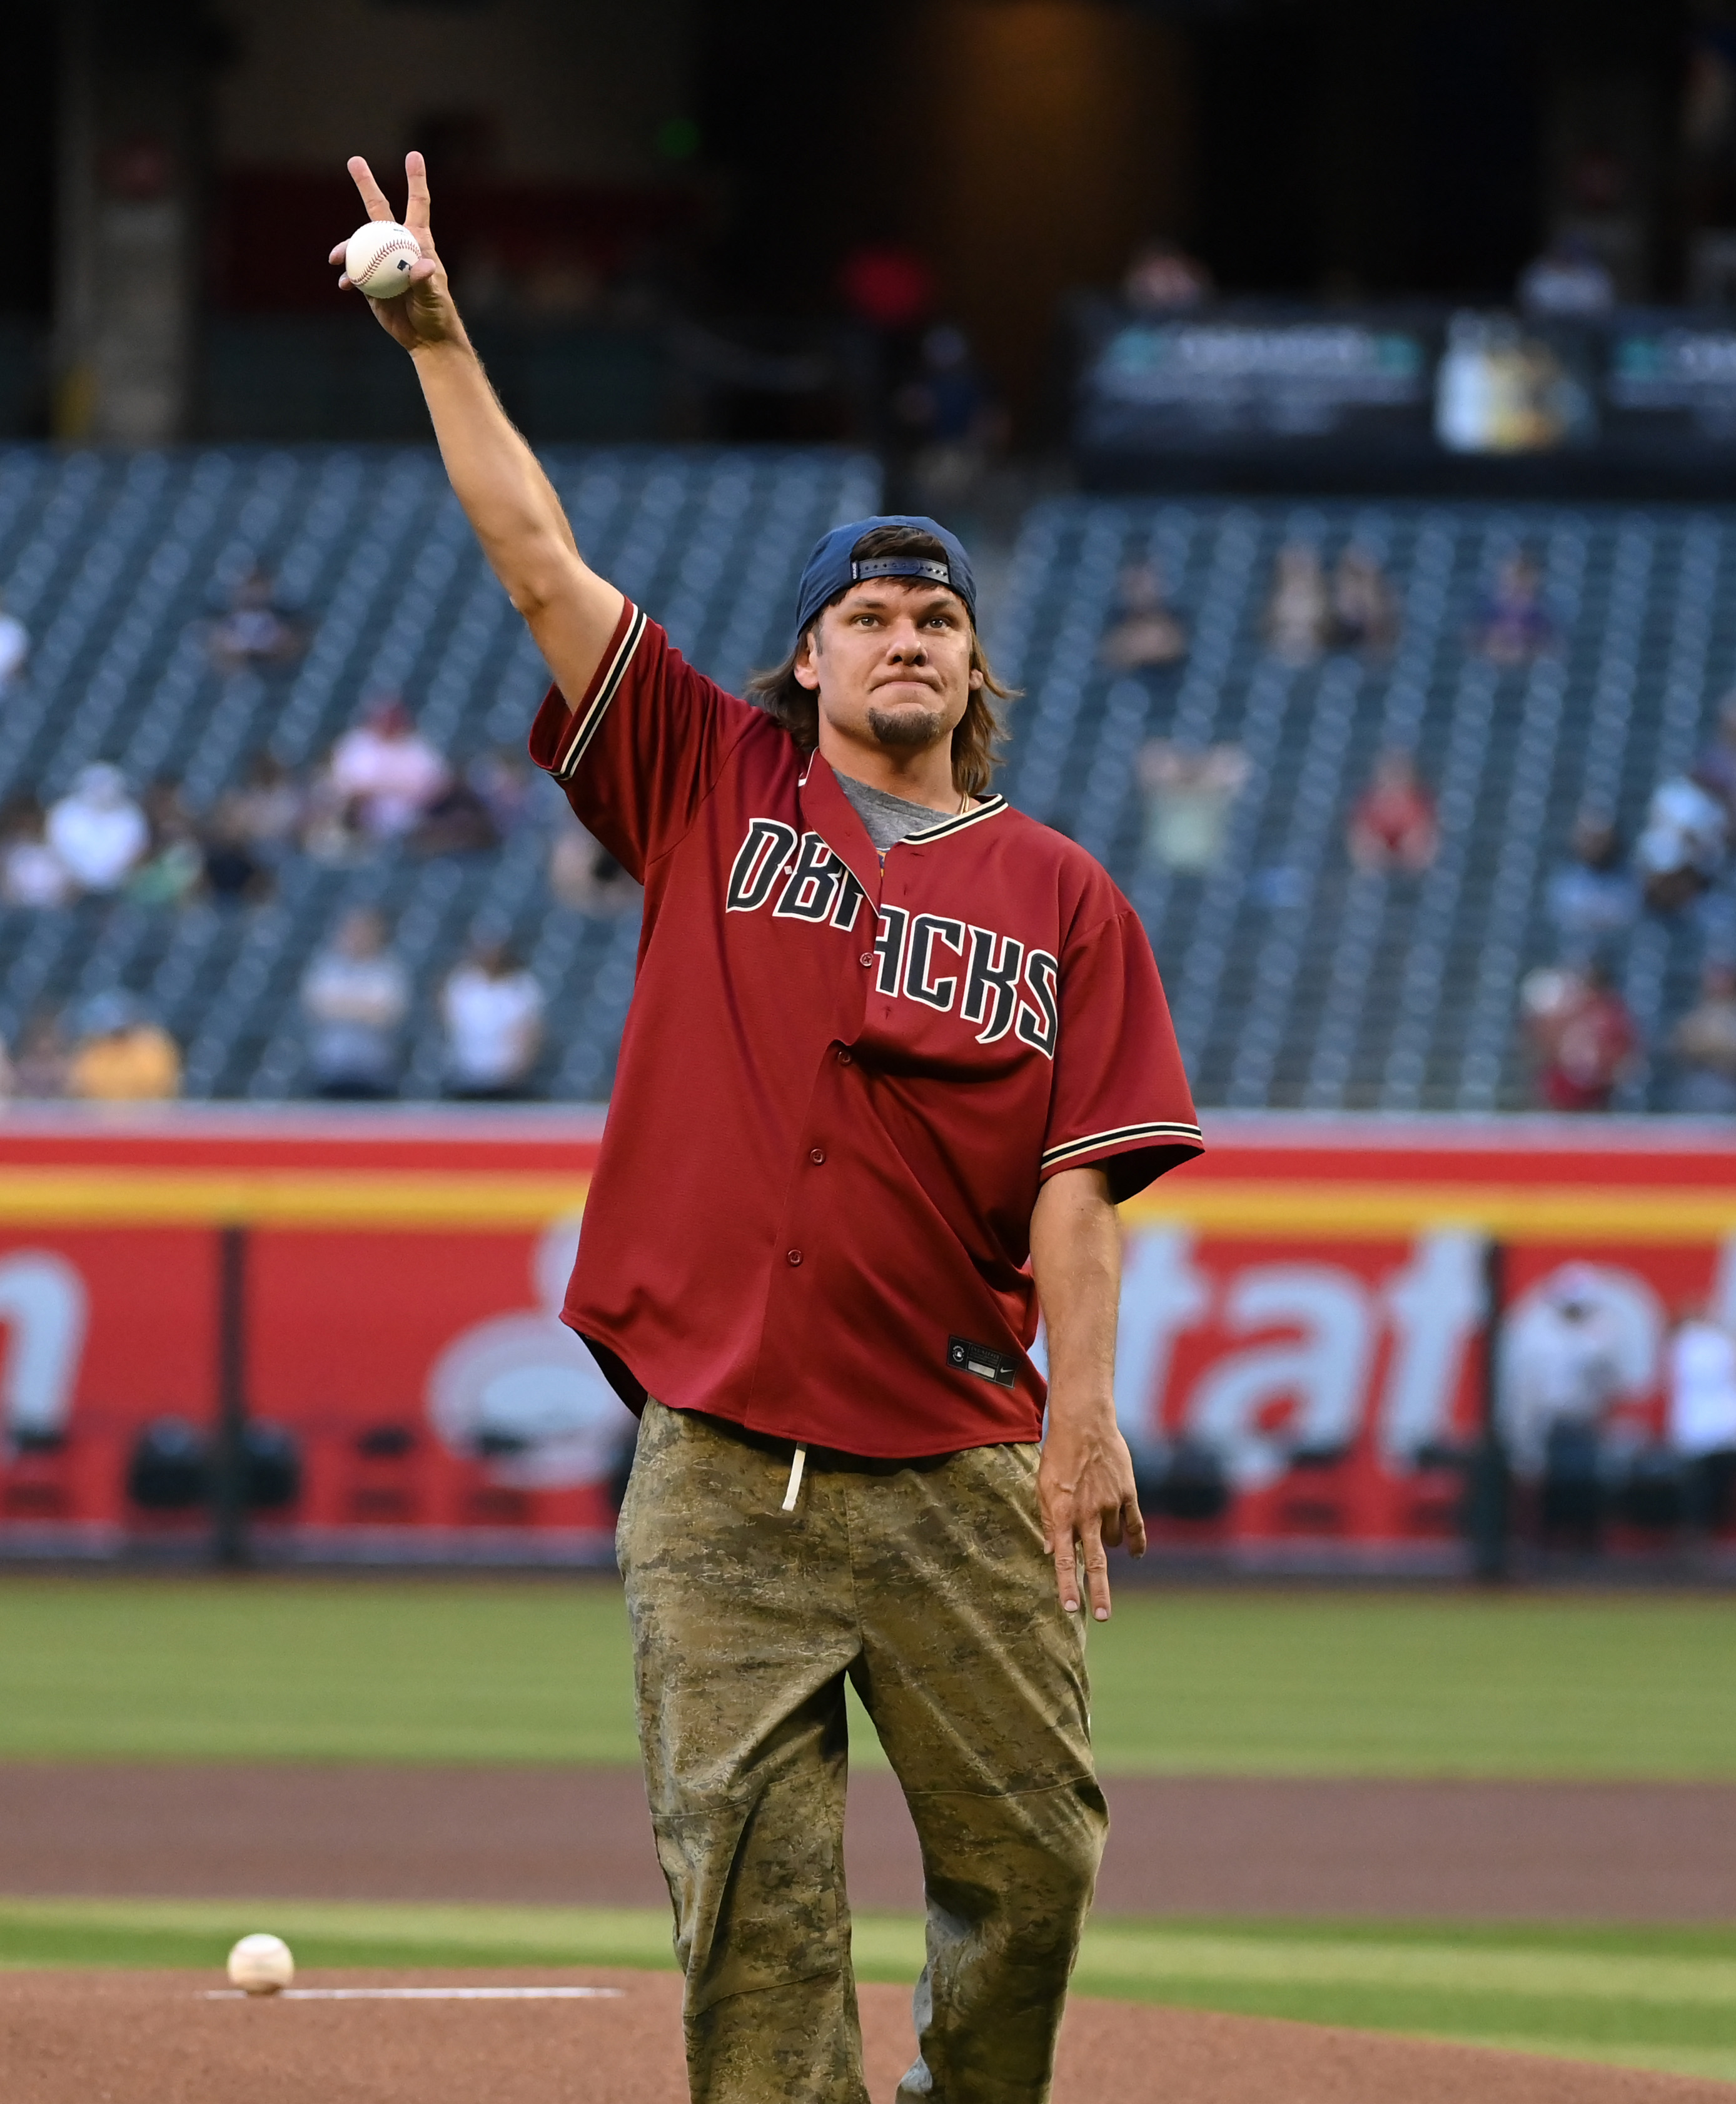 Theo Von ready to throw out the ceremonial first pitch prior to a game between the Arizona Diamondbacks and the Kansas City Royals on April 25, 2023, in Phoenix, Arizona. | Source: Getty Images